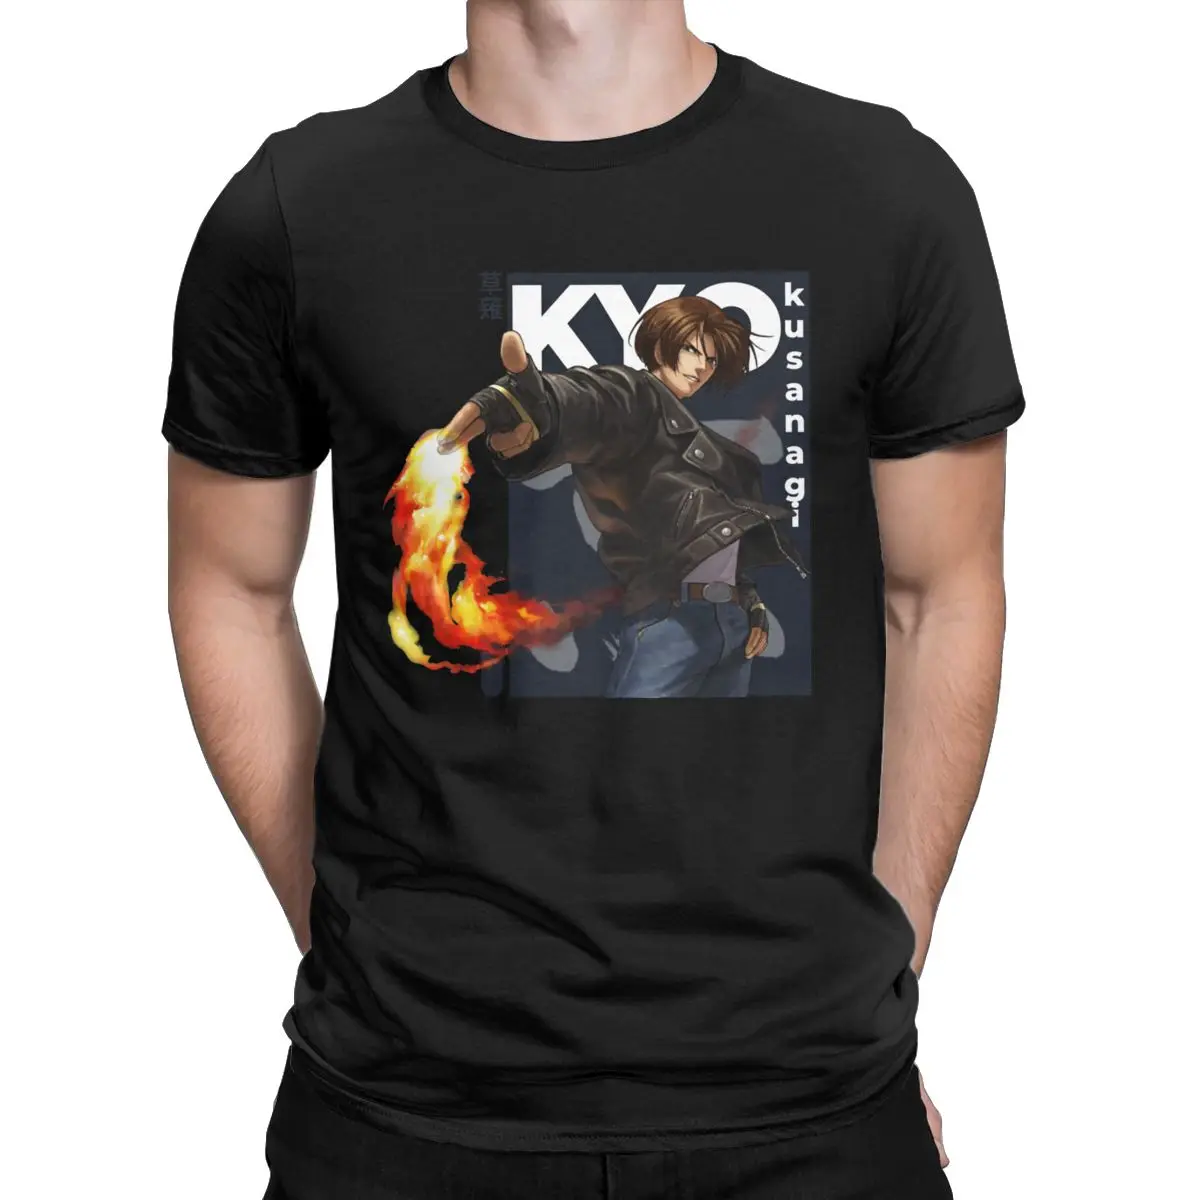 Kyo King Of Fighters Classic t shirt for men Funny 100% Cotton Tee Shirt Crew Neck Short Sleeve T Shirts Gift Idea Clothing